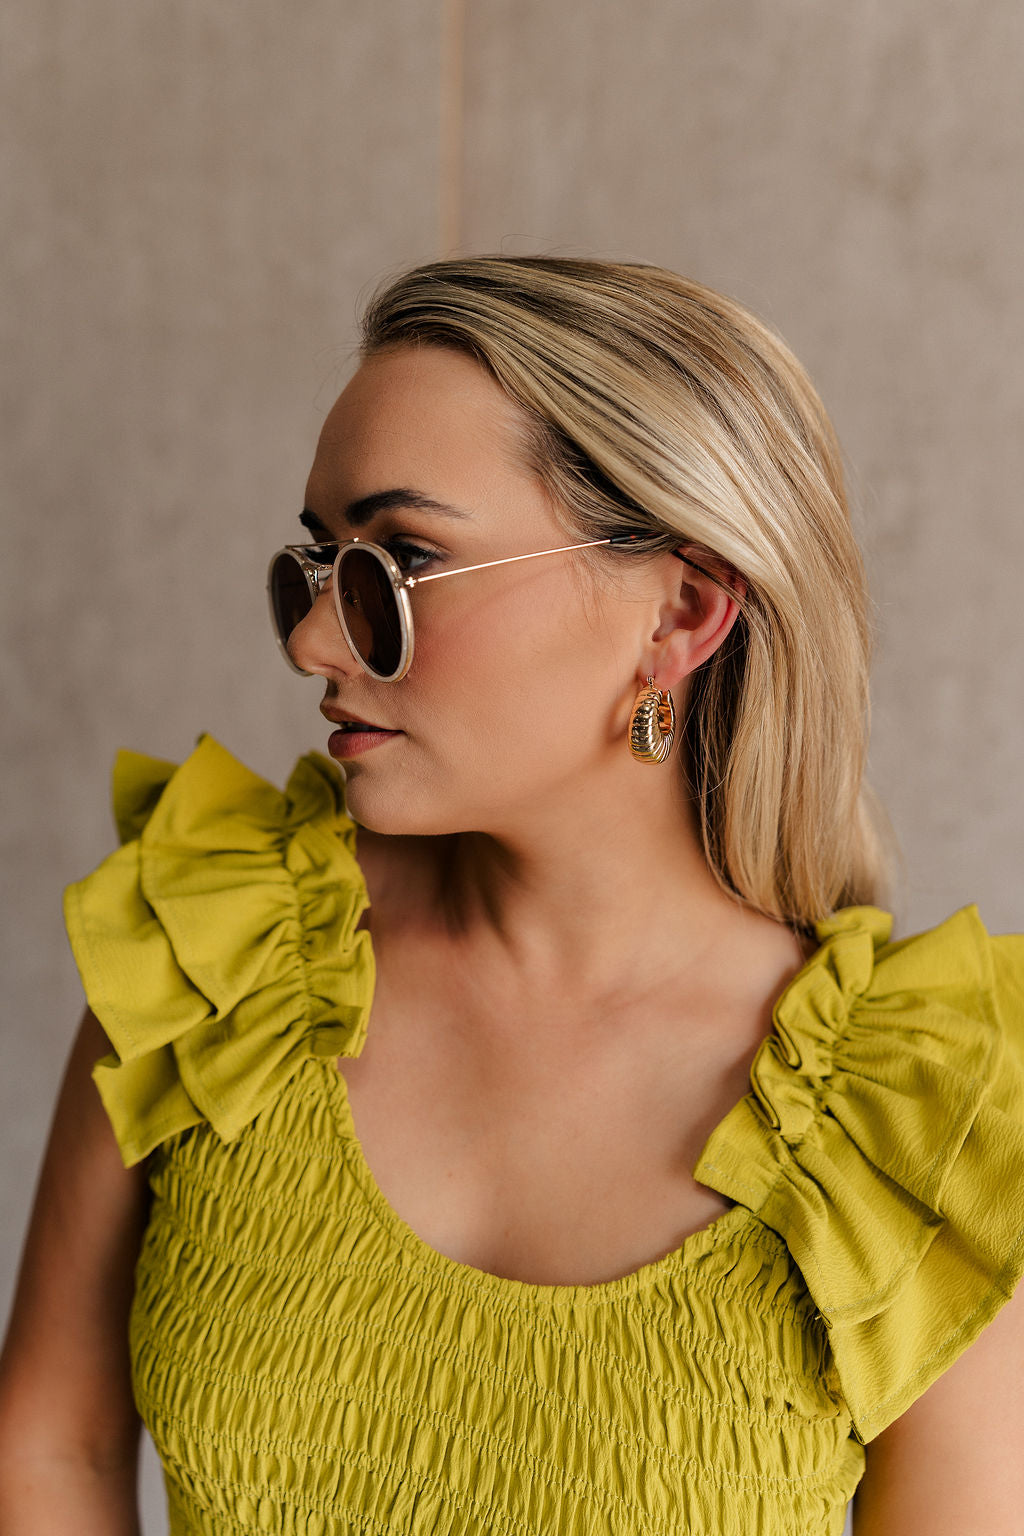 Side view of female model wearing the Athena Gold Ribbed Scooped Hoop Earring which features gold ribbed scooped hoop earring with back closure